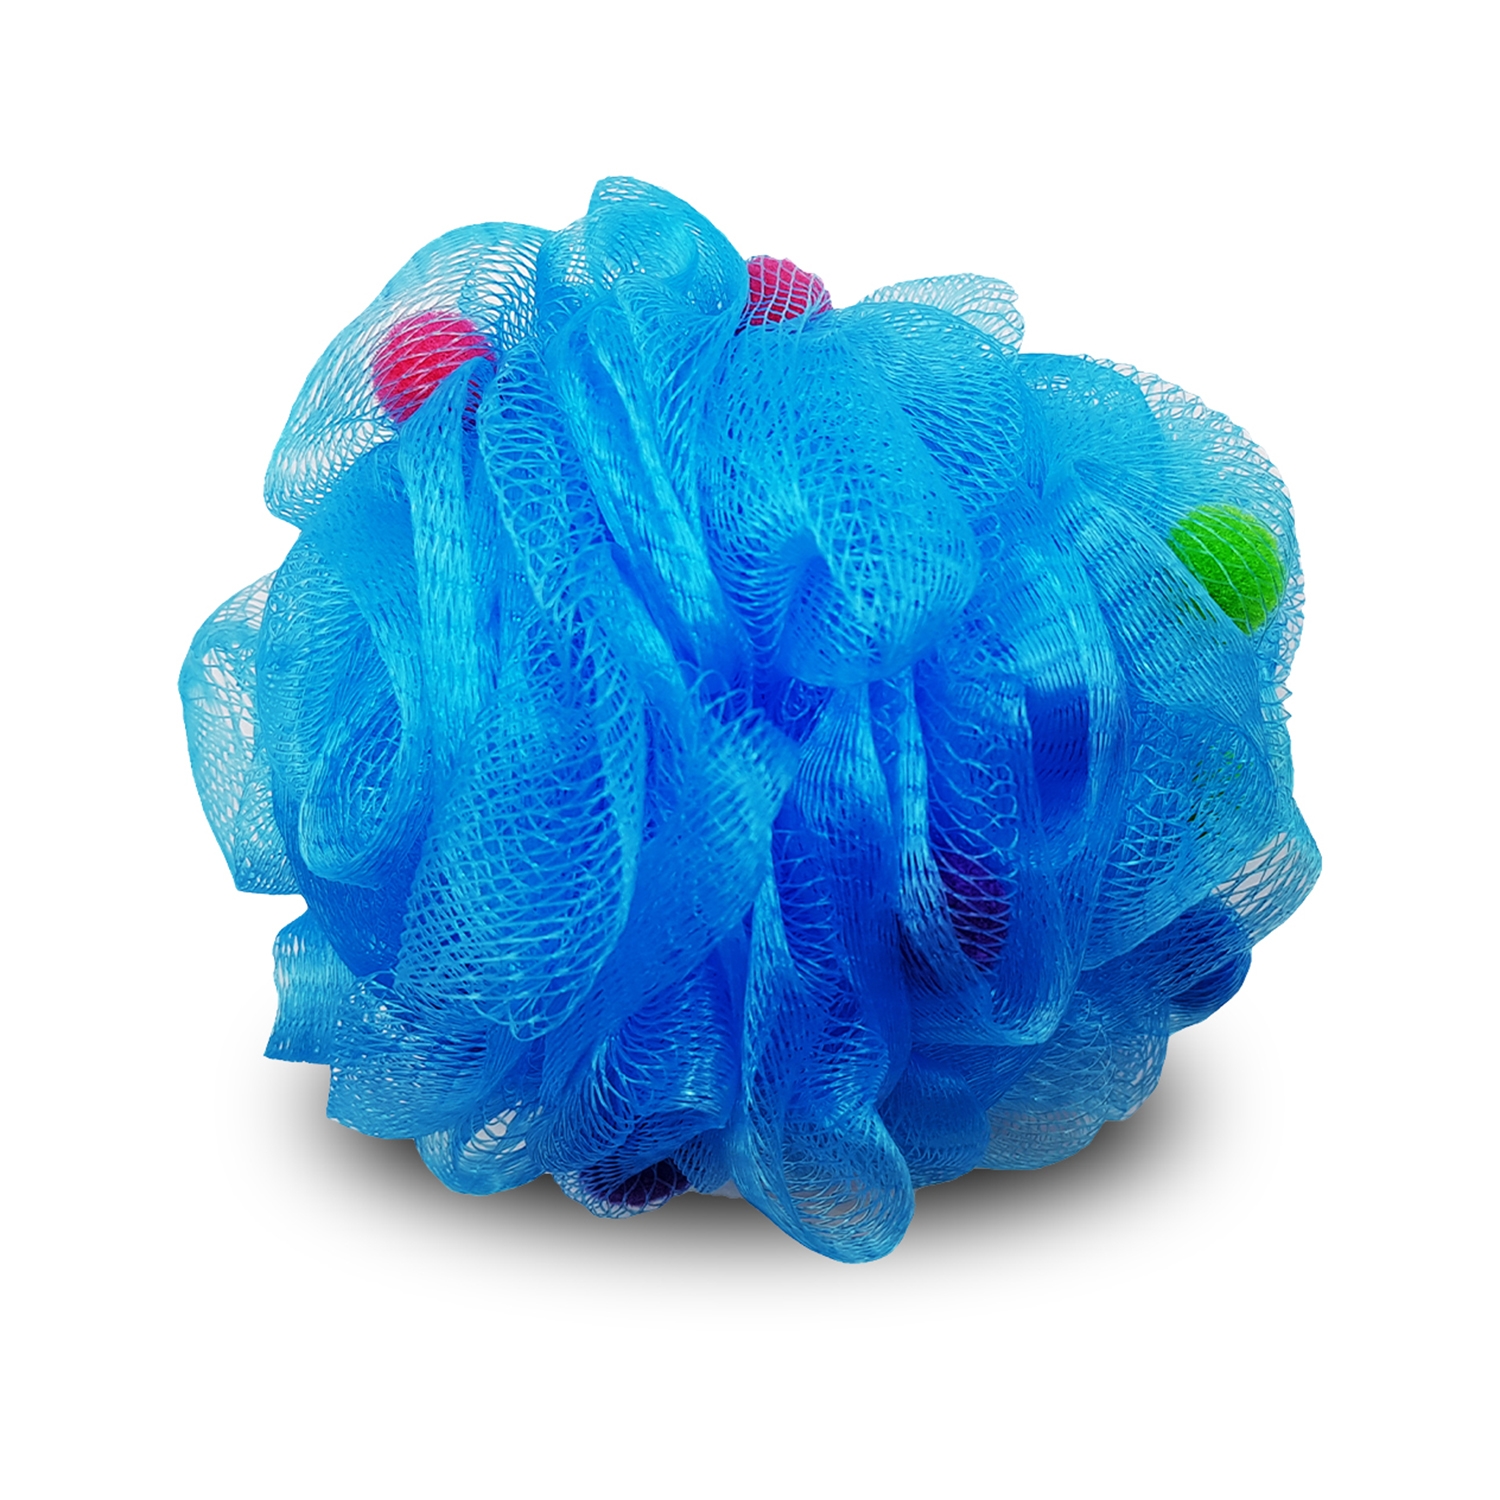 Majestique Cleanse Flower Loofah Mesh Bath Shower Ball (Color May Vary)